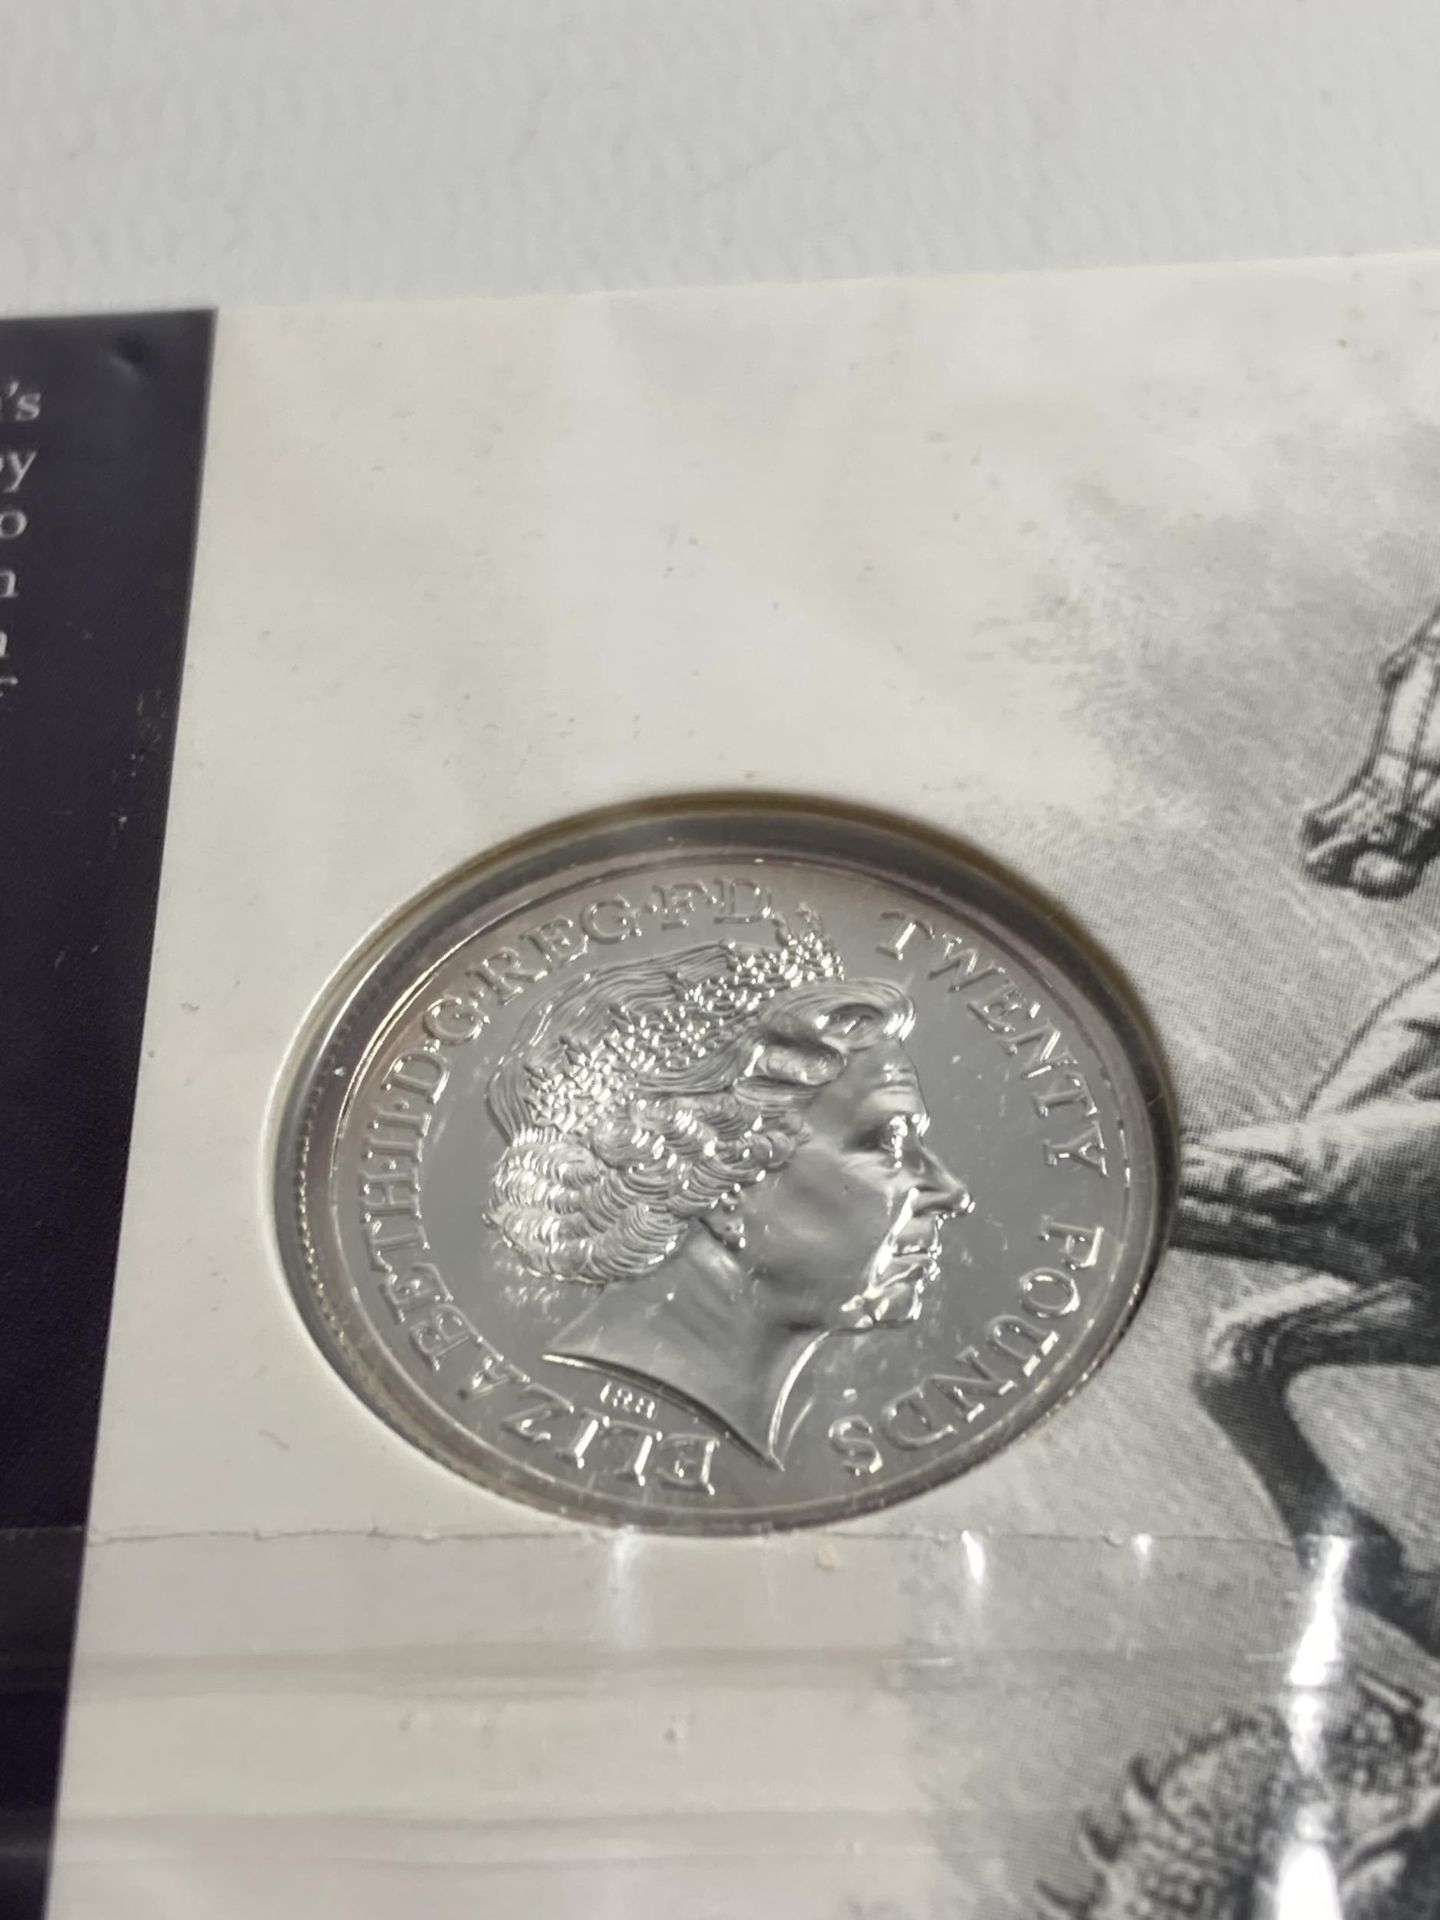 A ROYAL MINT GEORGE AND THE DRAGON 2013 UK £20 FINE SILVER COIN - Image 3 of 3